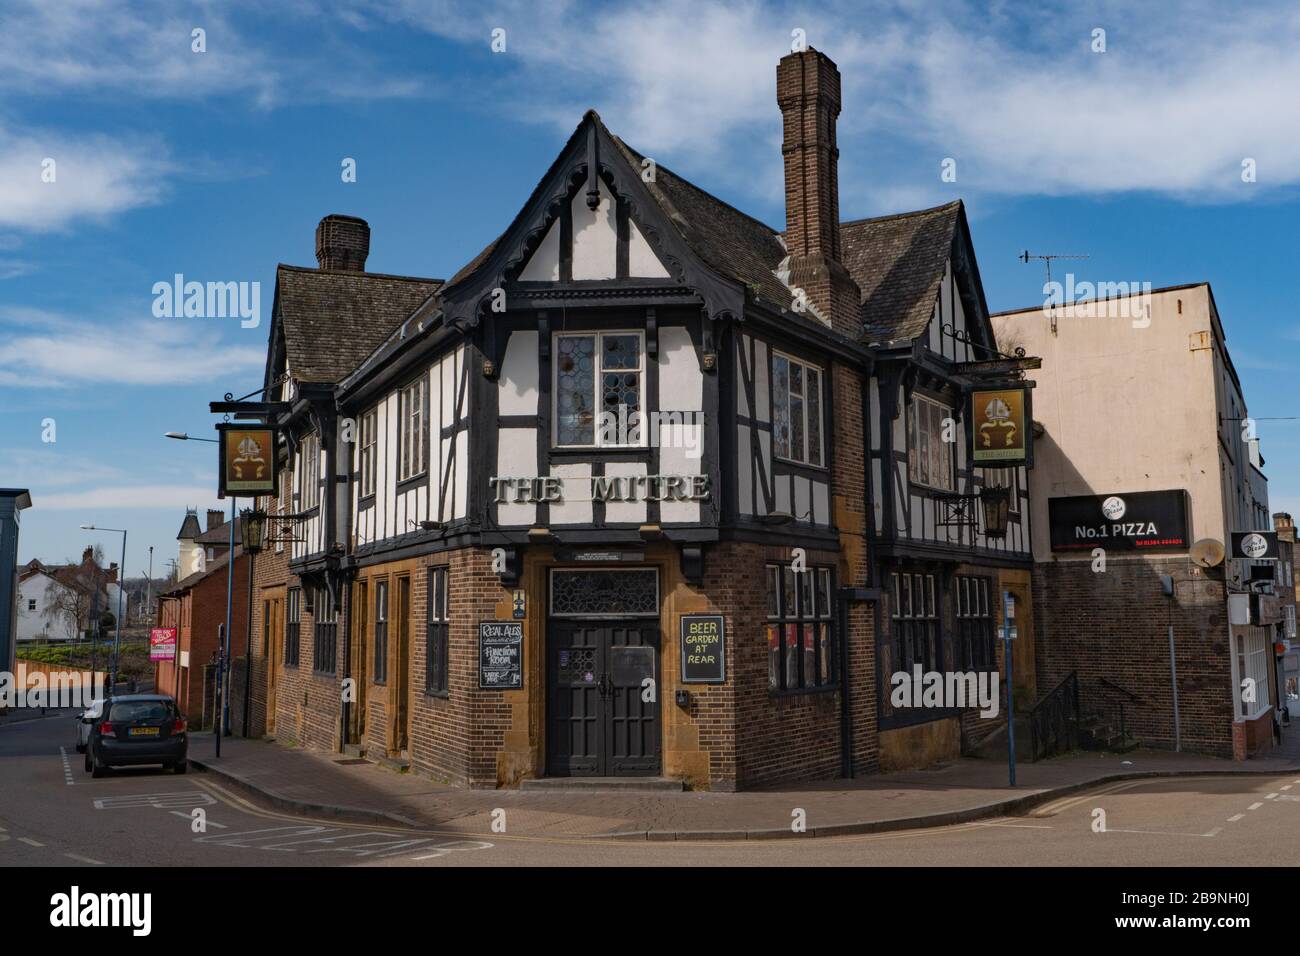 The Mitre public House, closed due to lockdown during the Coronavirus Pandemic. Stourbridge, March 2020. Stock Photo